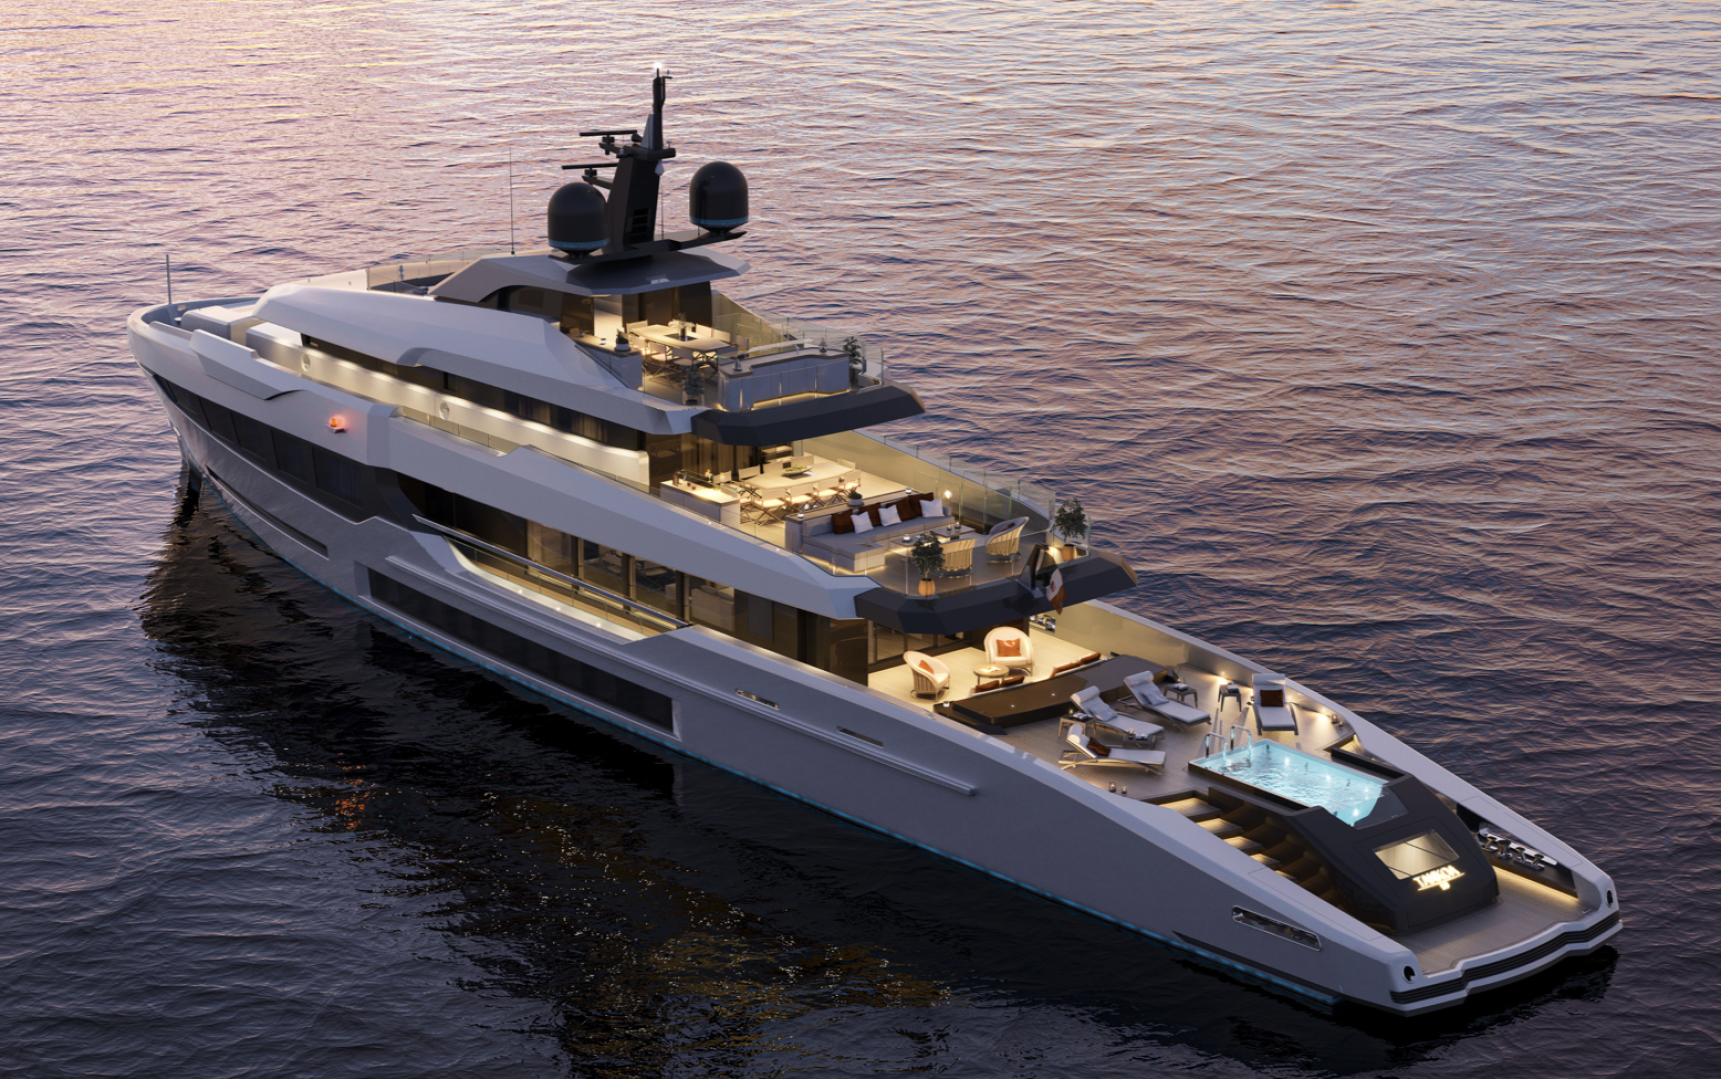 Tankoa Yachts unveils the new T500 Tethys, the superyacht explorer designed by Hot Lab